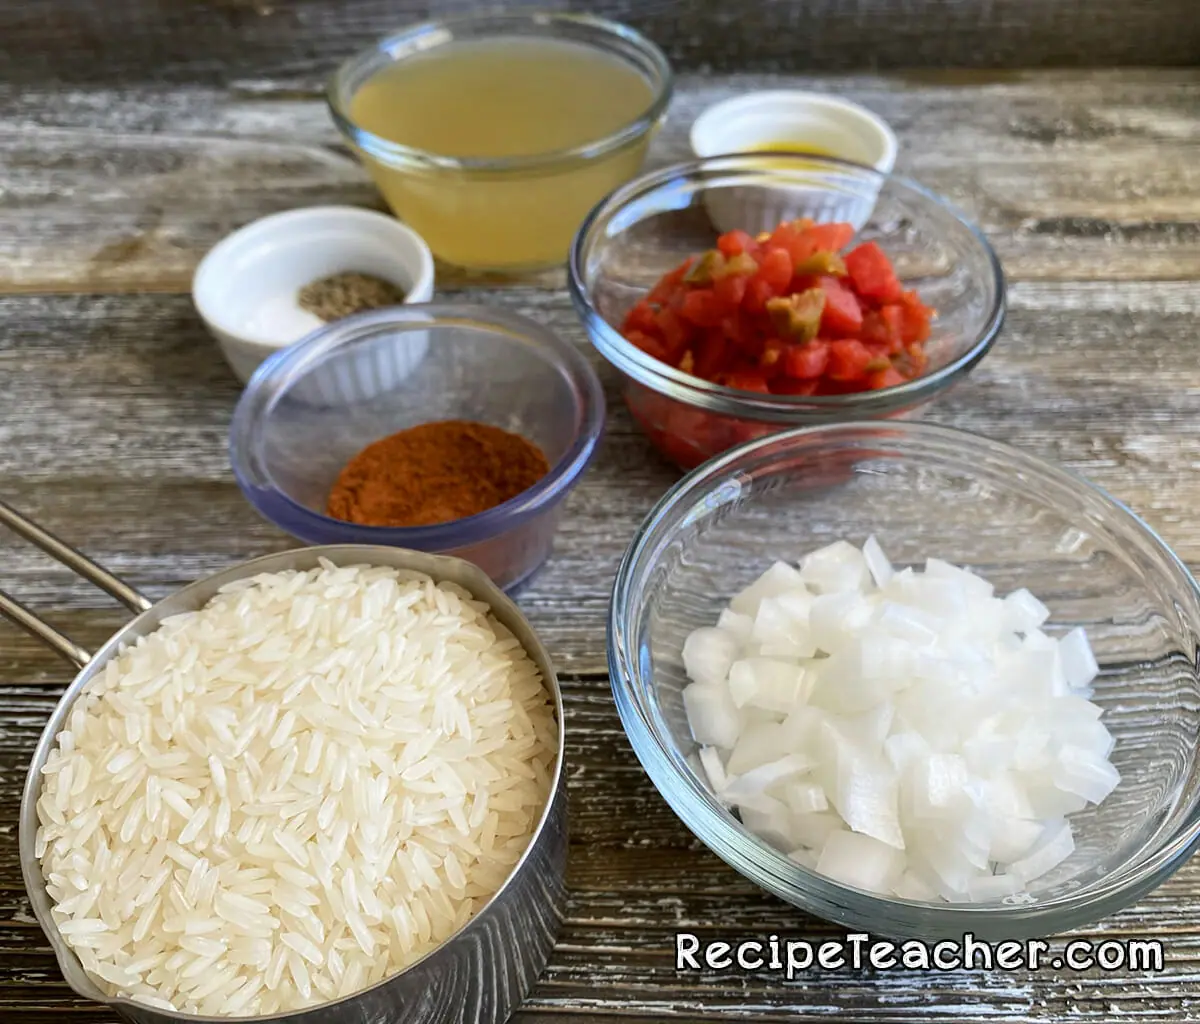 All the ingredients for Instant Pot Spanish rice.